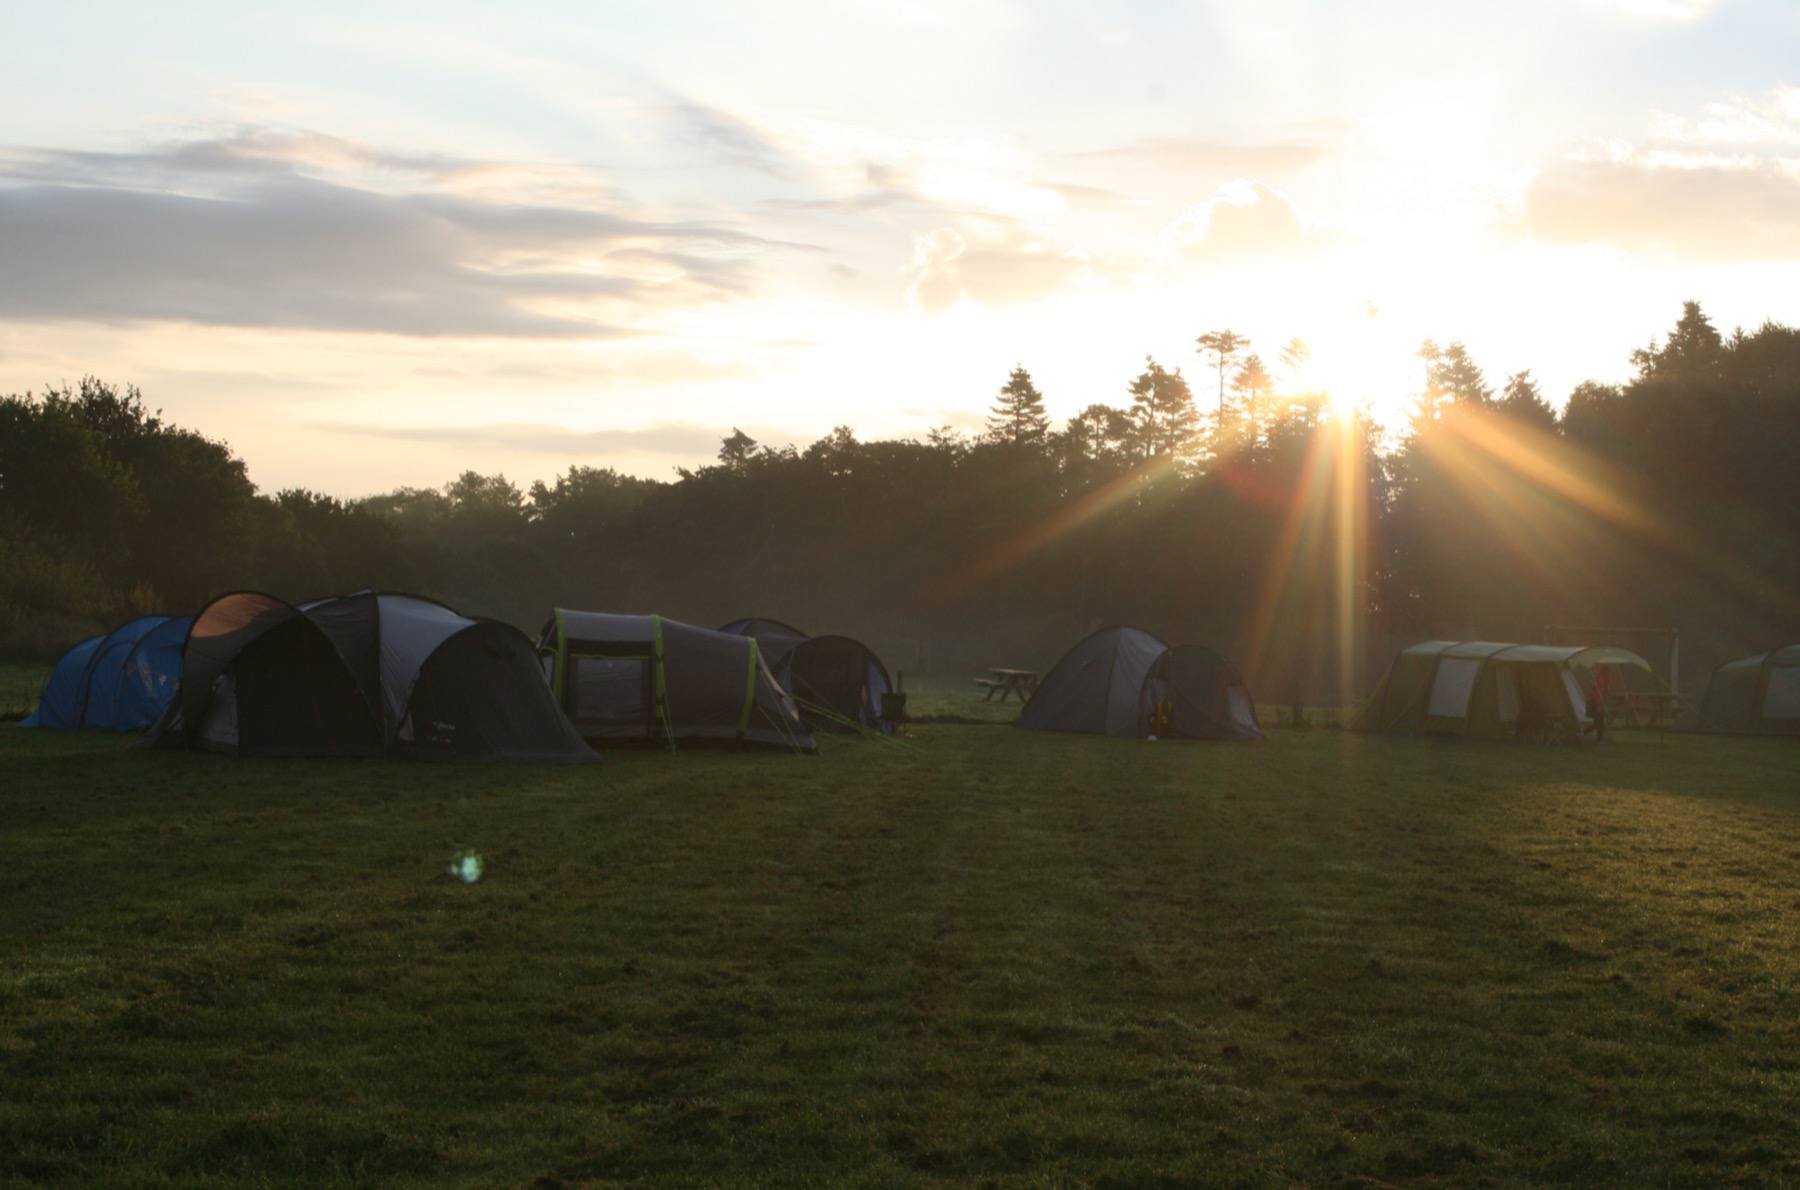 Sunset over the camp